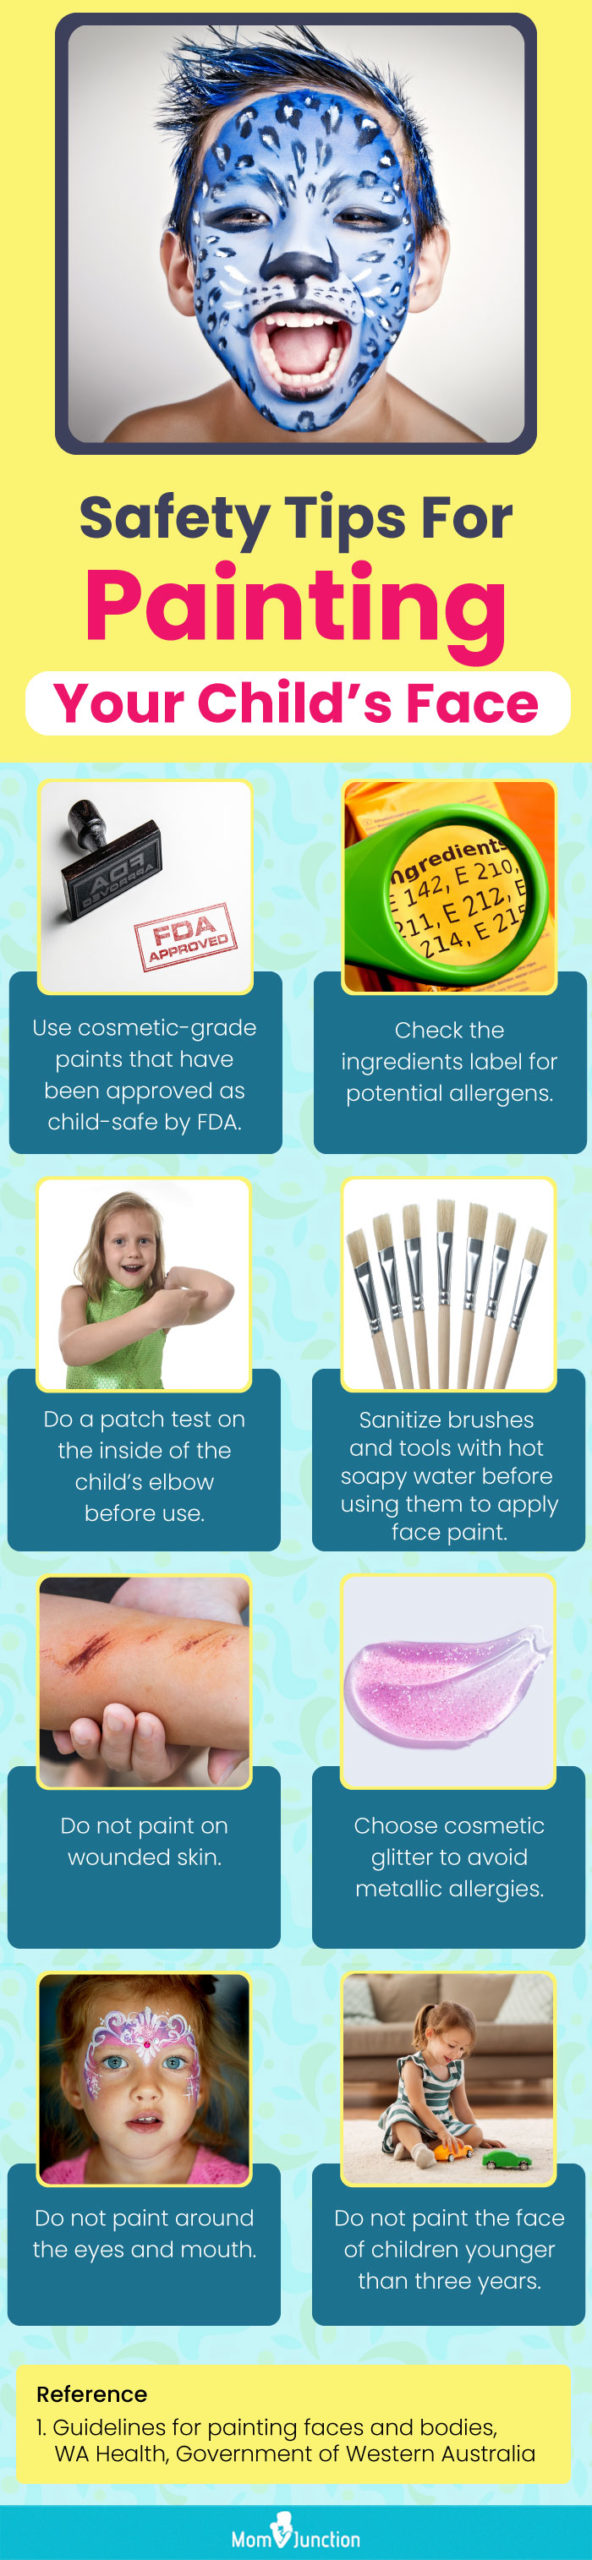 safety tips for painting your childs face (infographic)